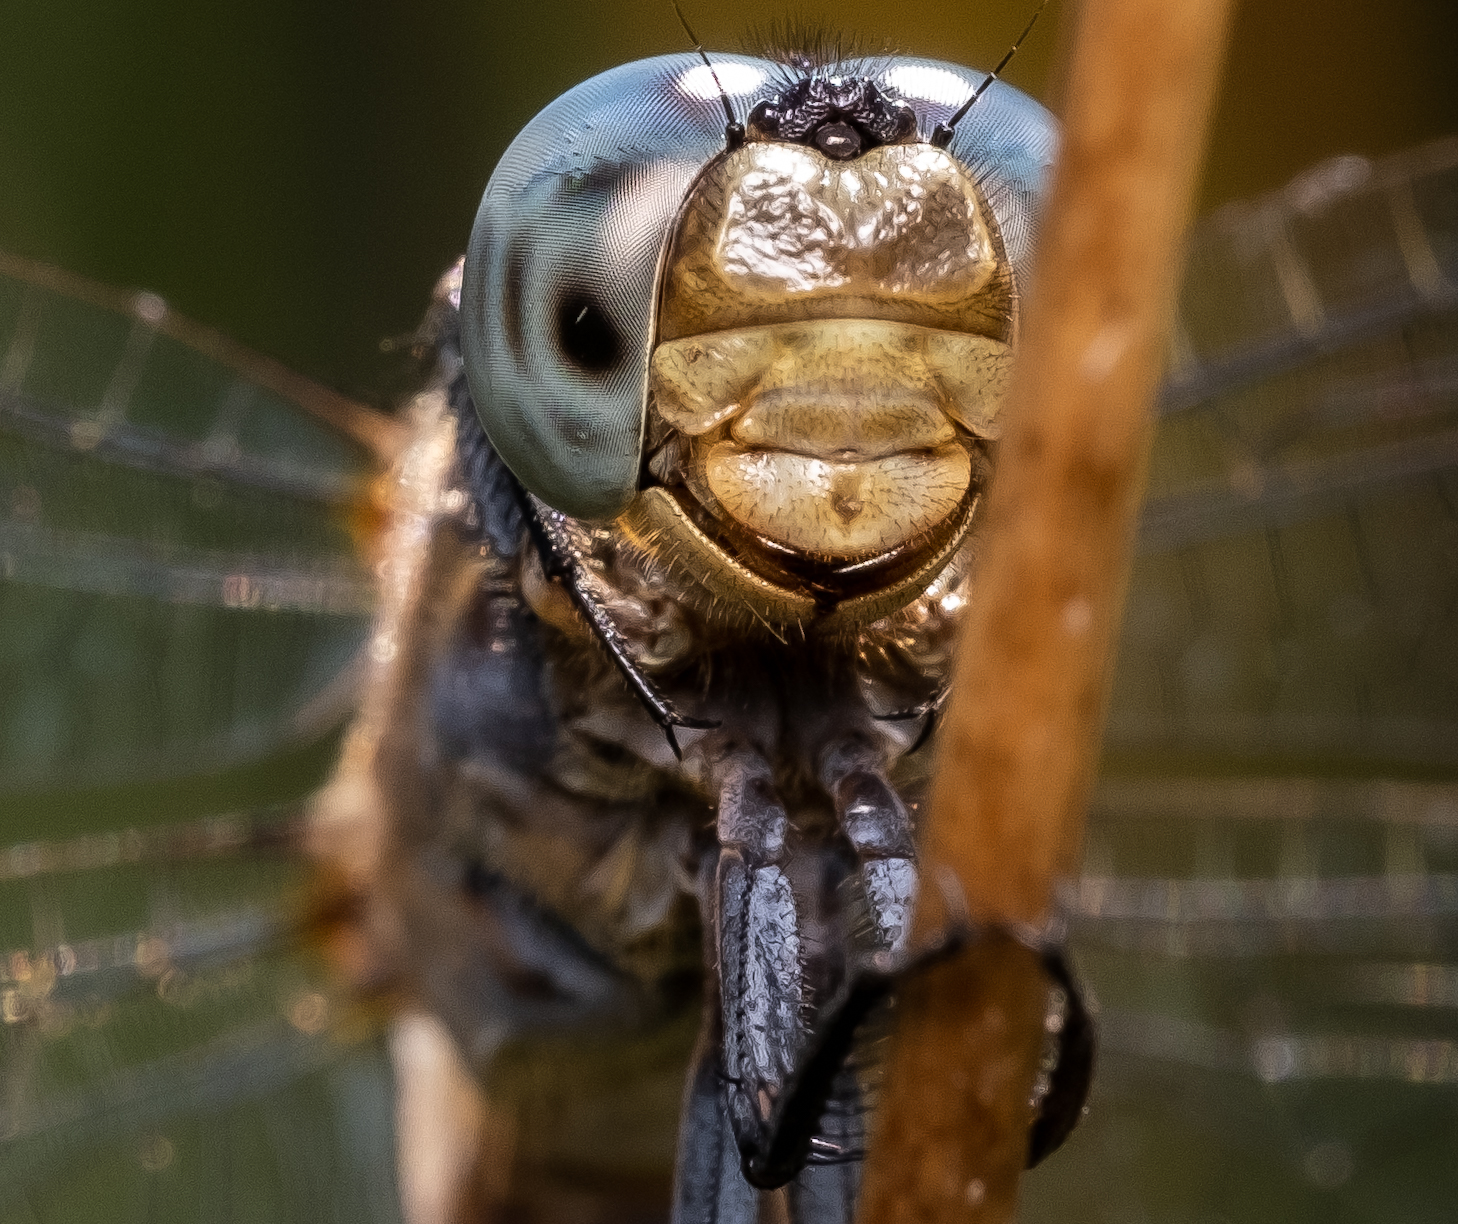 Dragonfly with a smile...